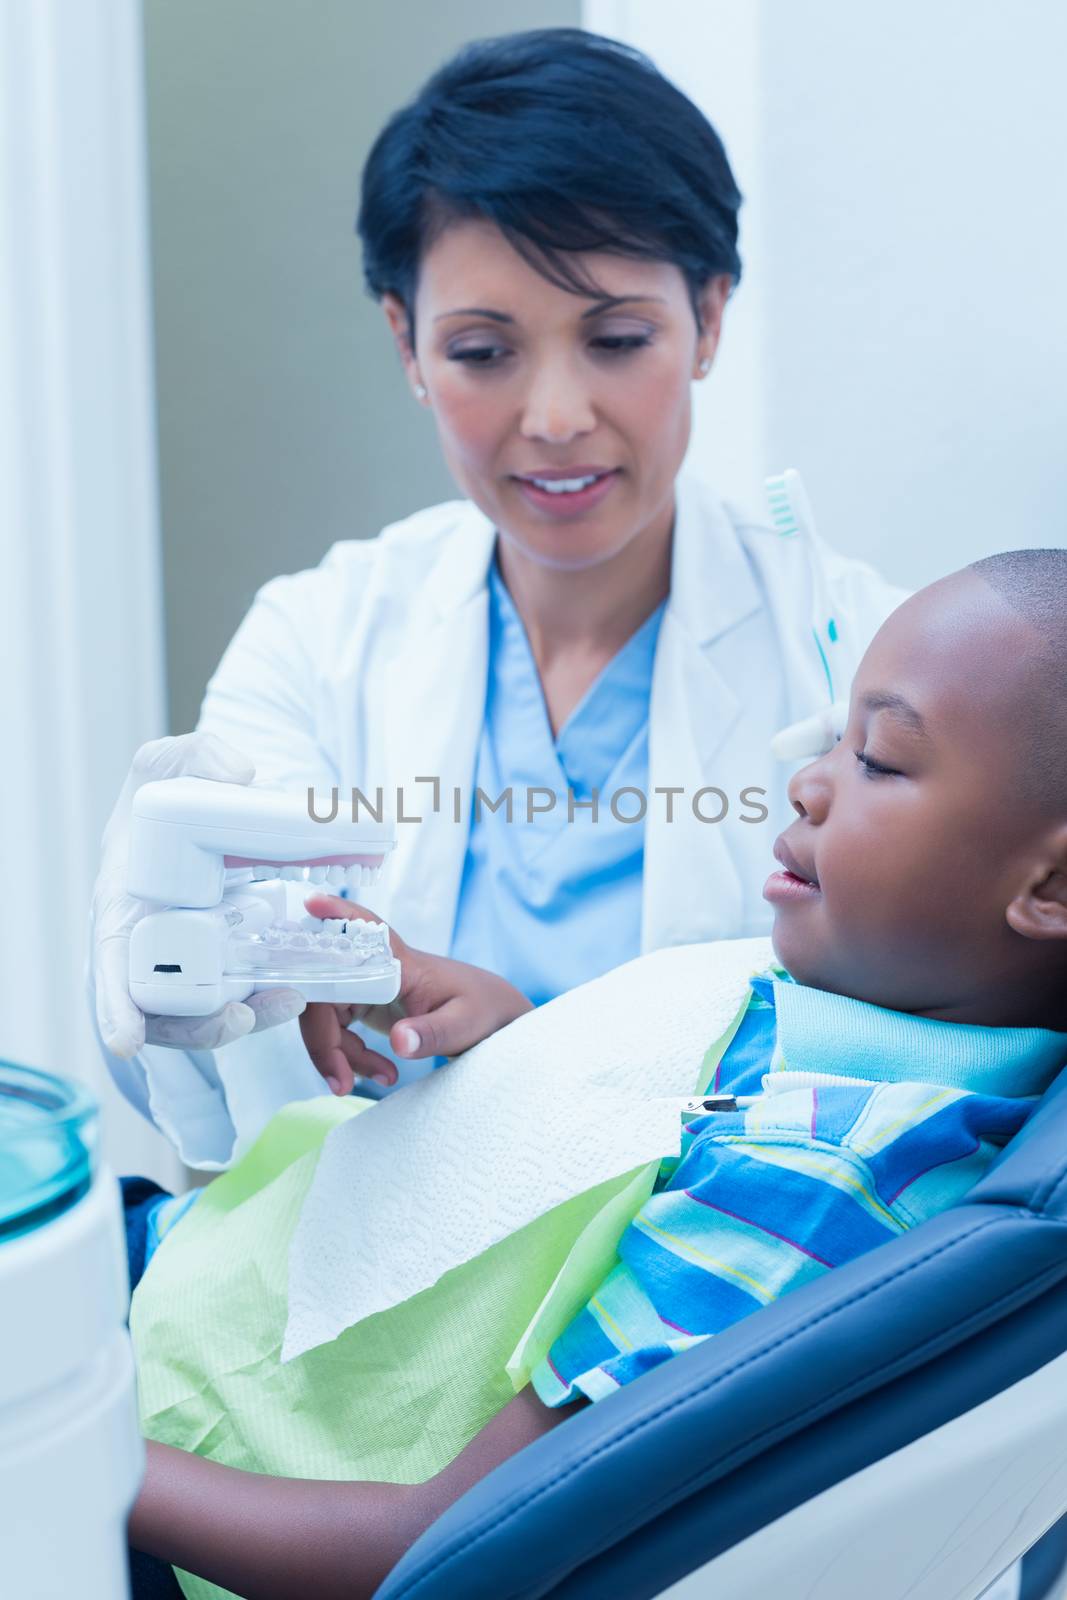 Female dentist showing young boy prosthesis teeth